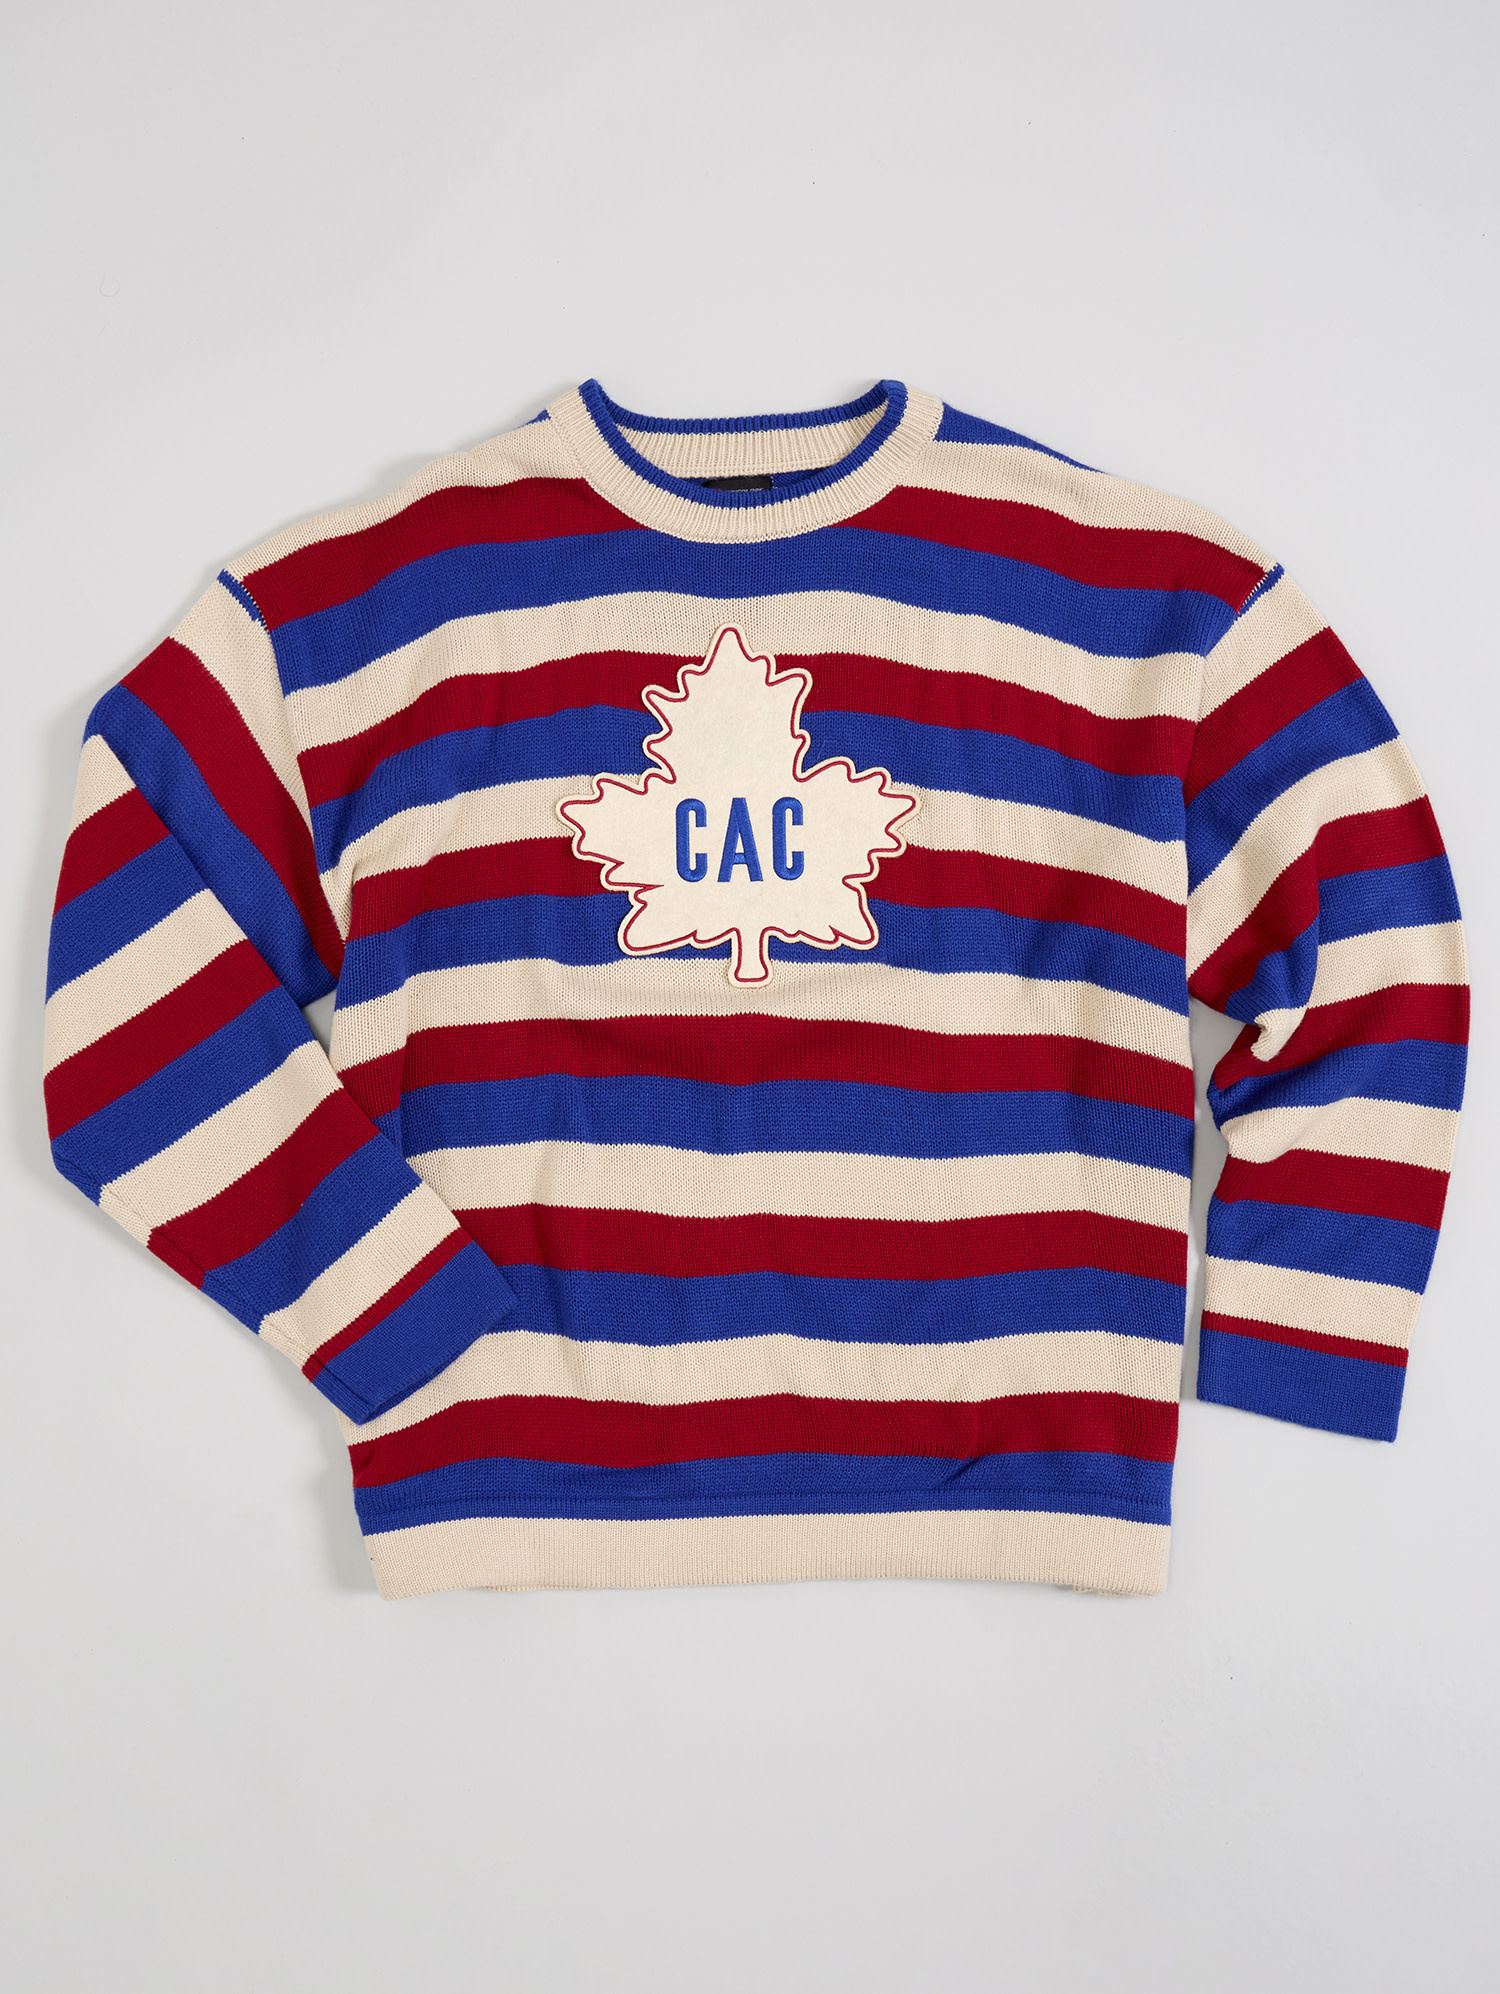 Montreal Canadiens 1912-1913 